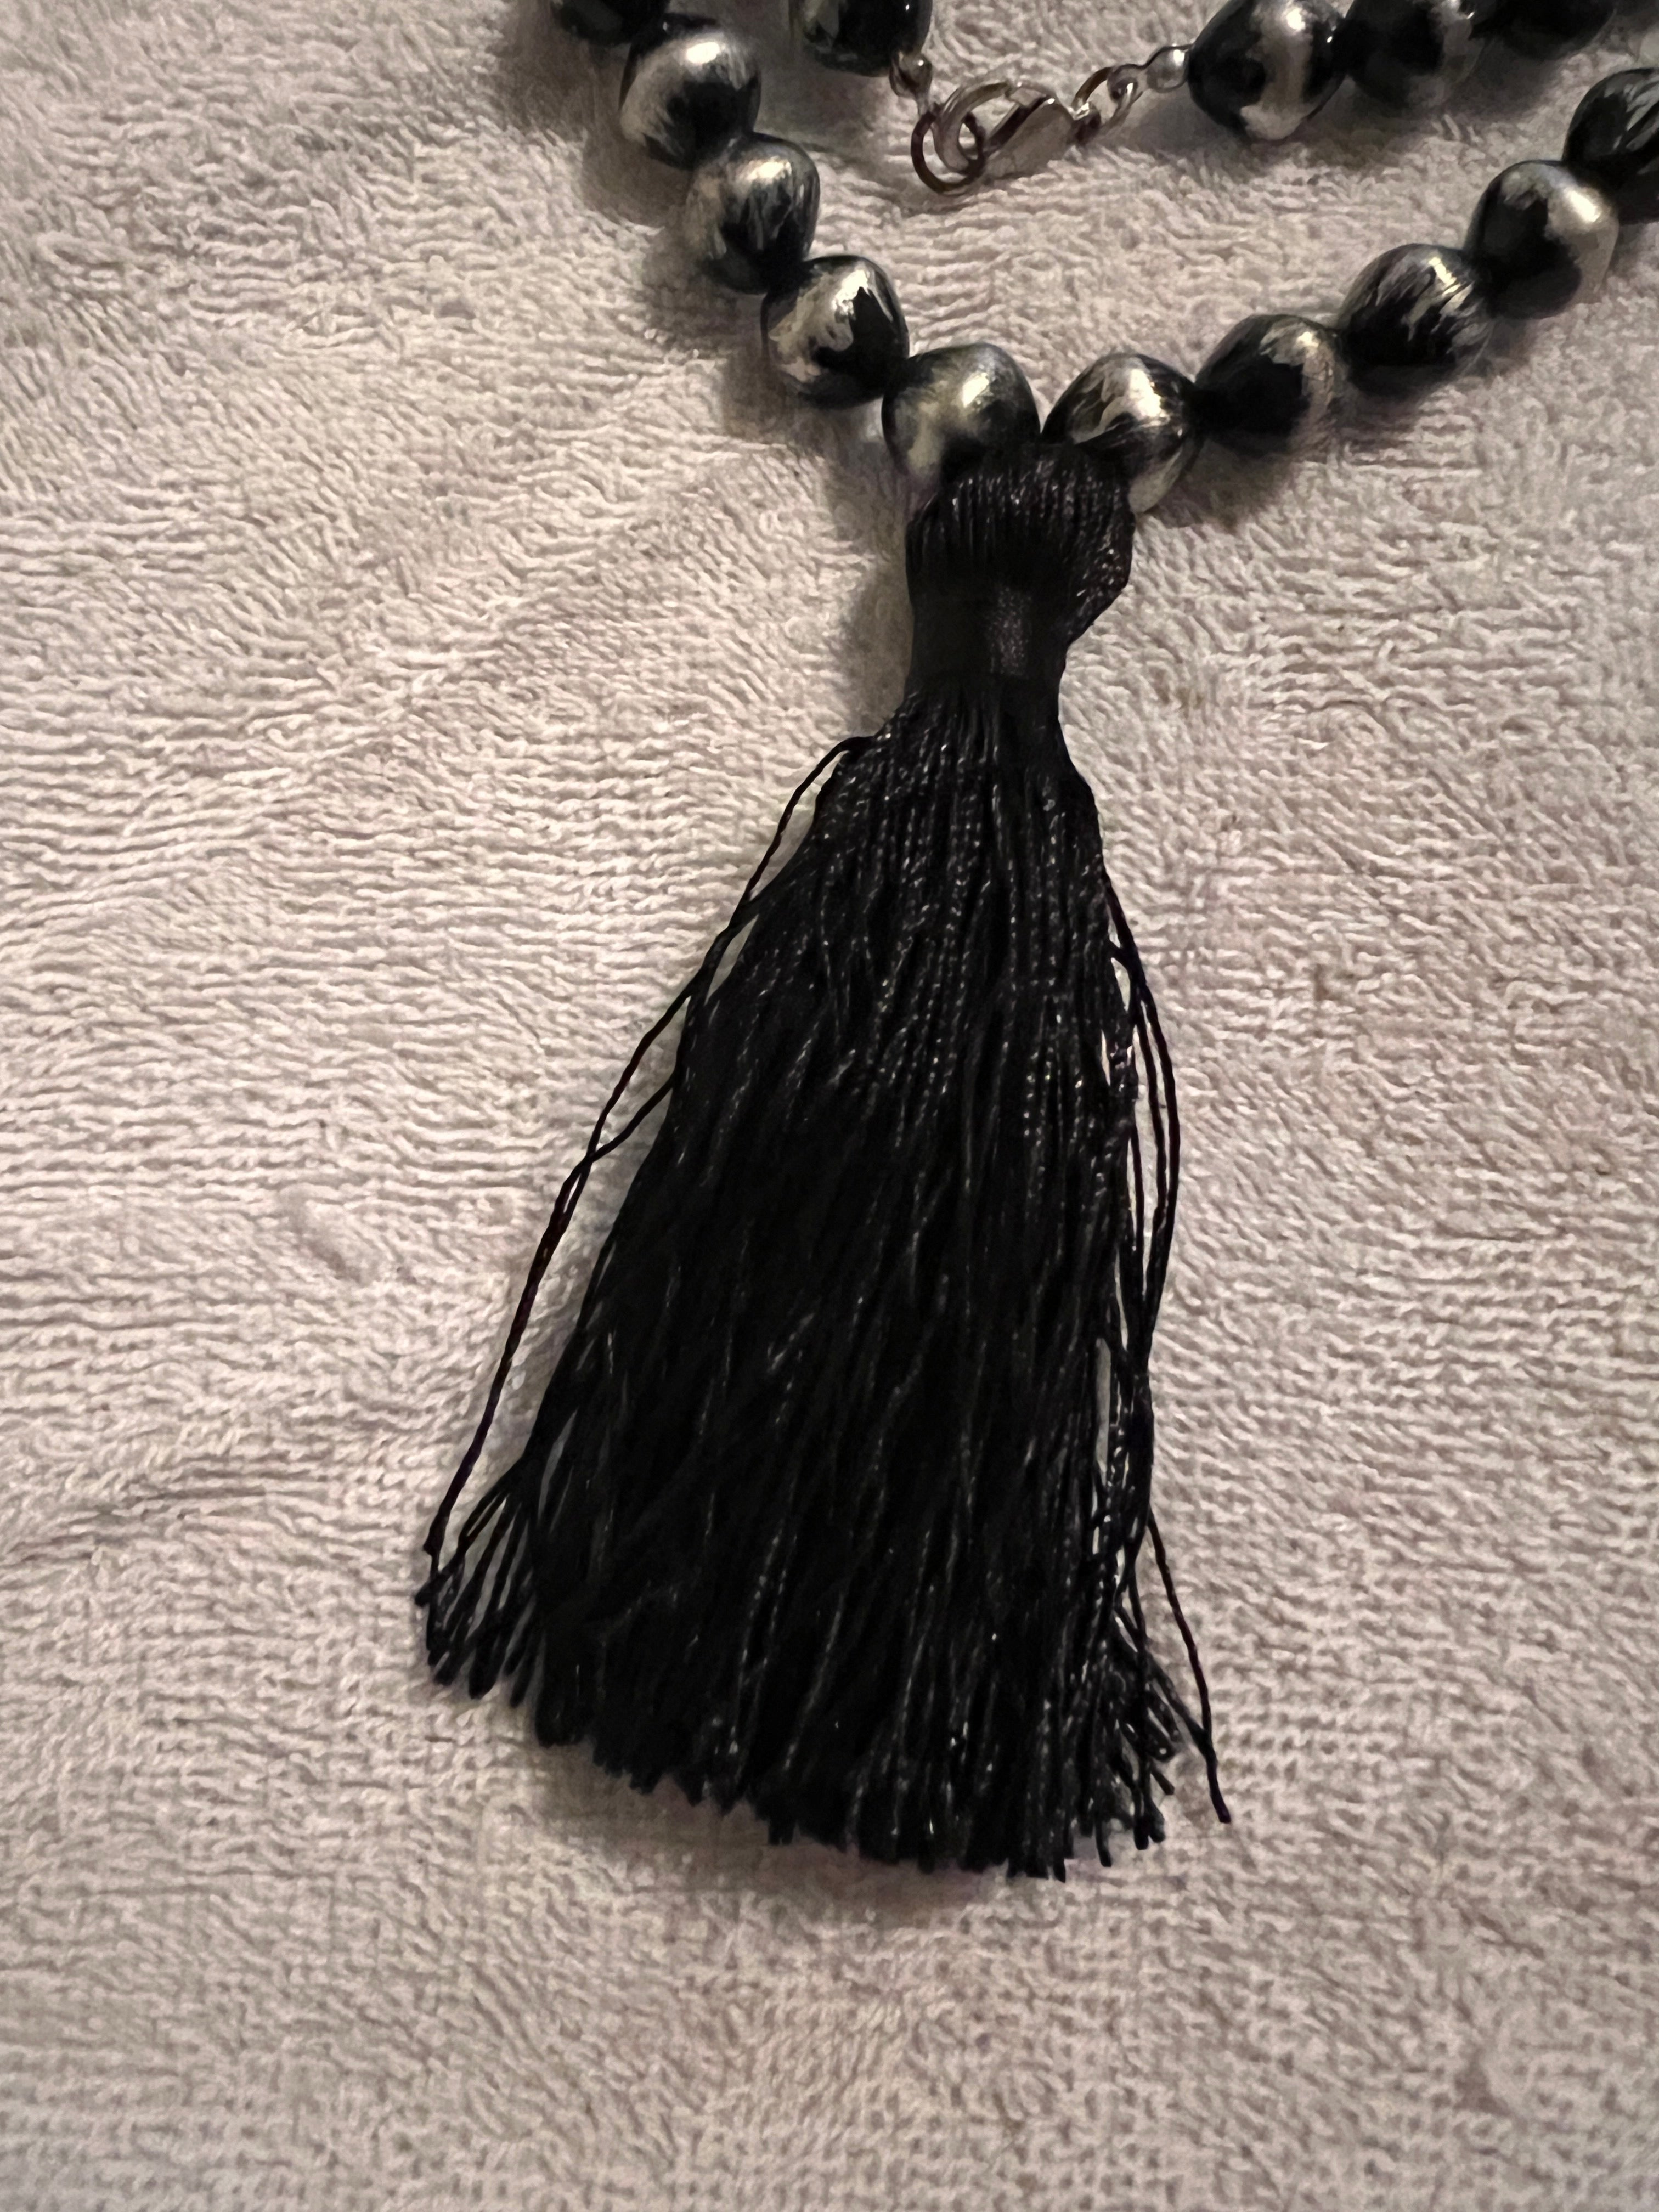 Two-tone Black and Silver Beaded Necklace with Black Tassel